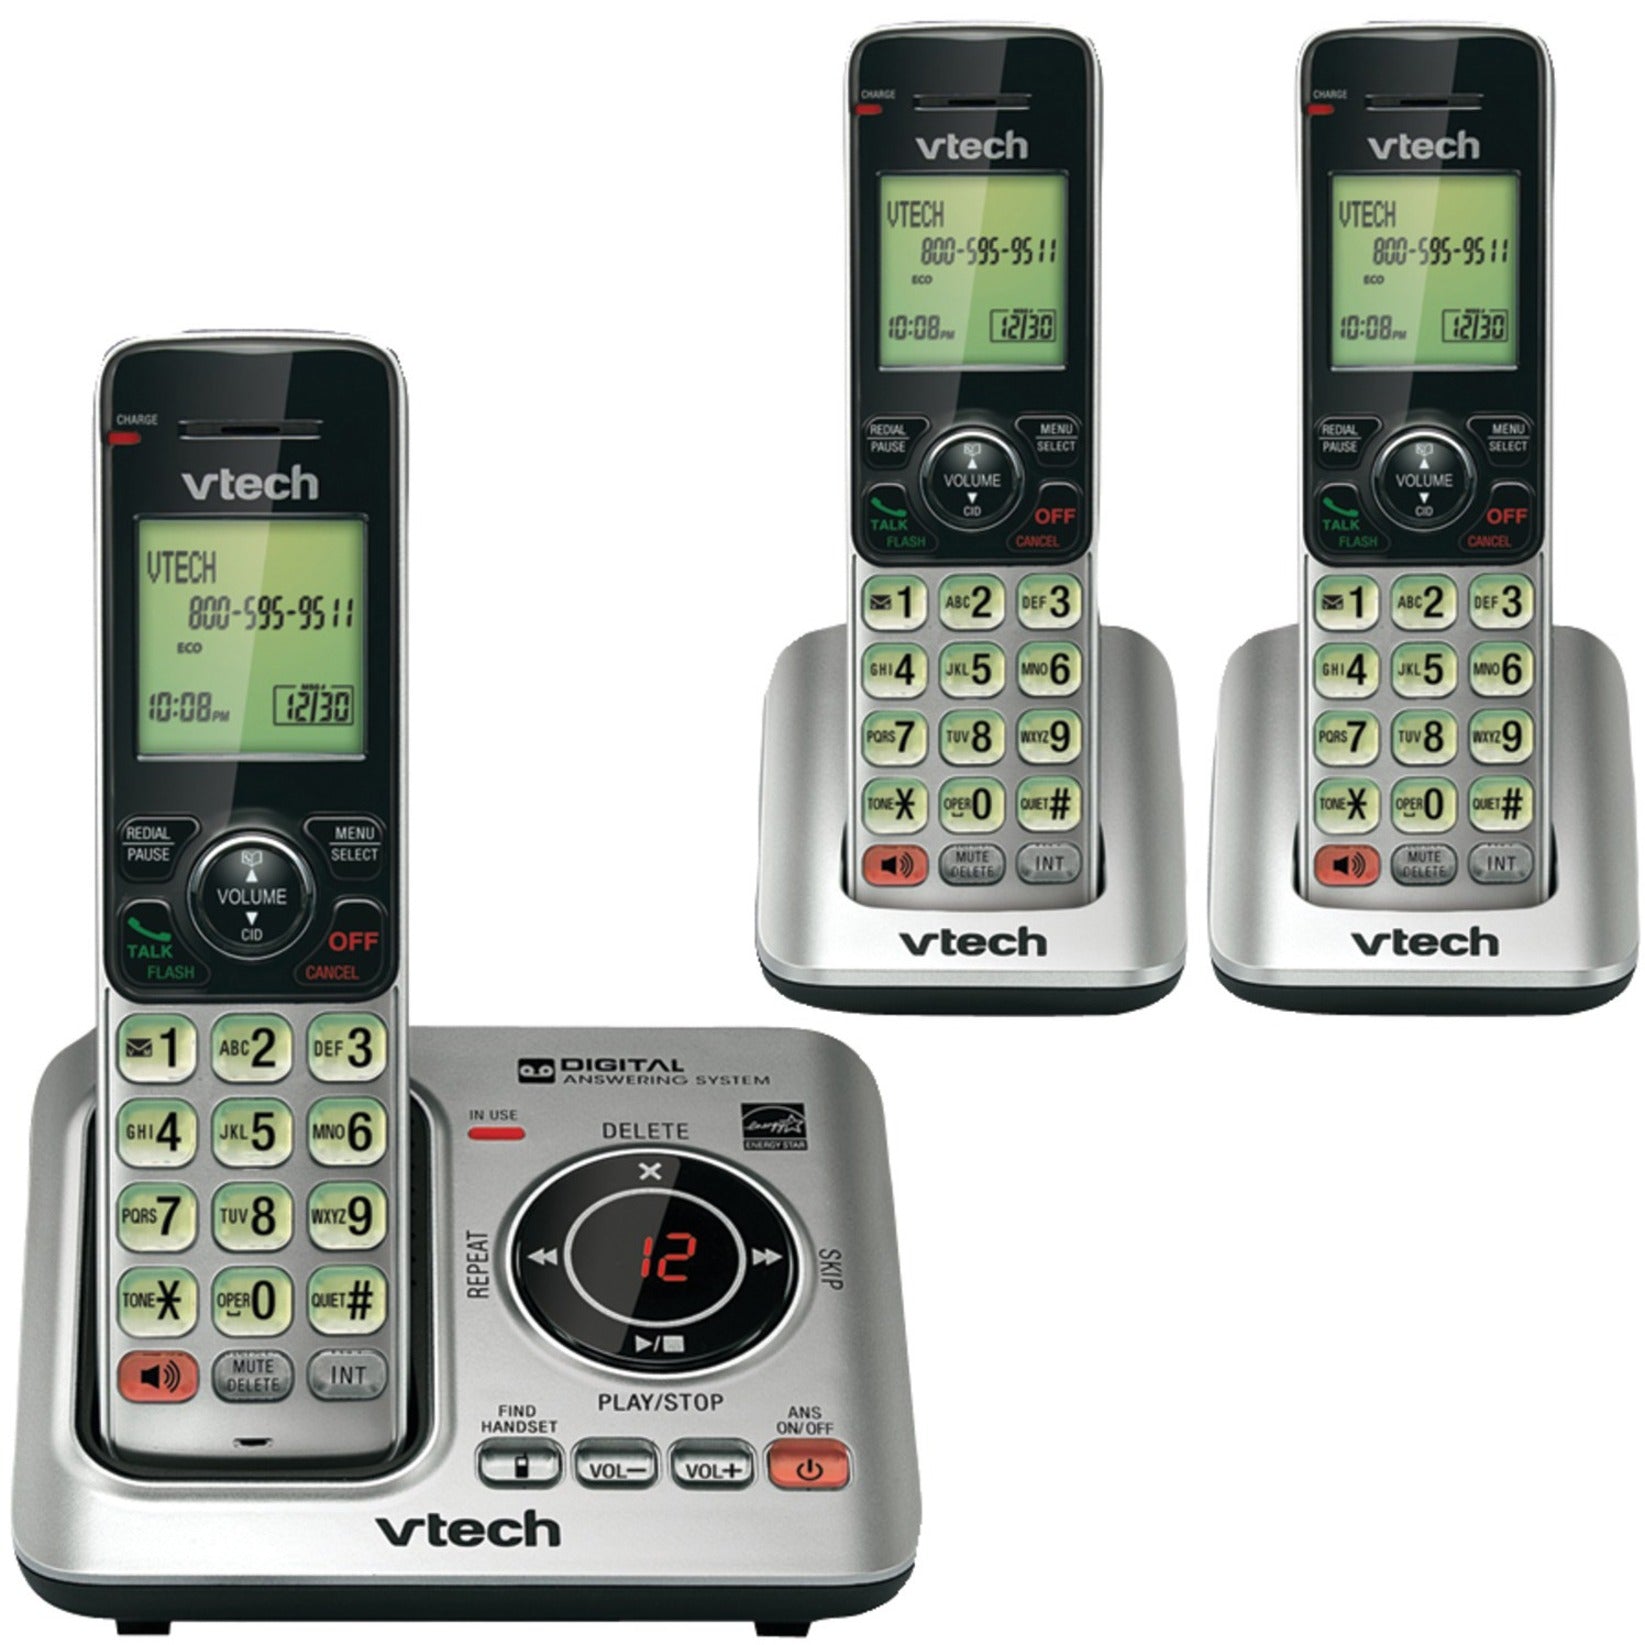 VTech VTCS6629-3 CS6629-3 DECT 6.0 Cordless Phone, 3 Handset Answering System with Caller ID/Call Waiting